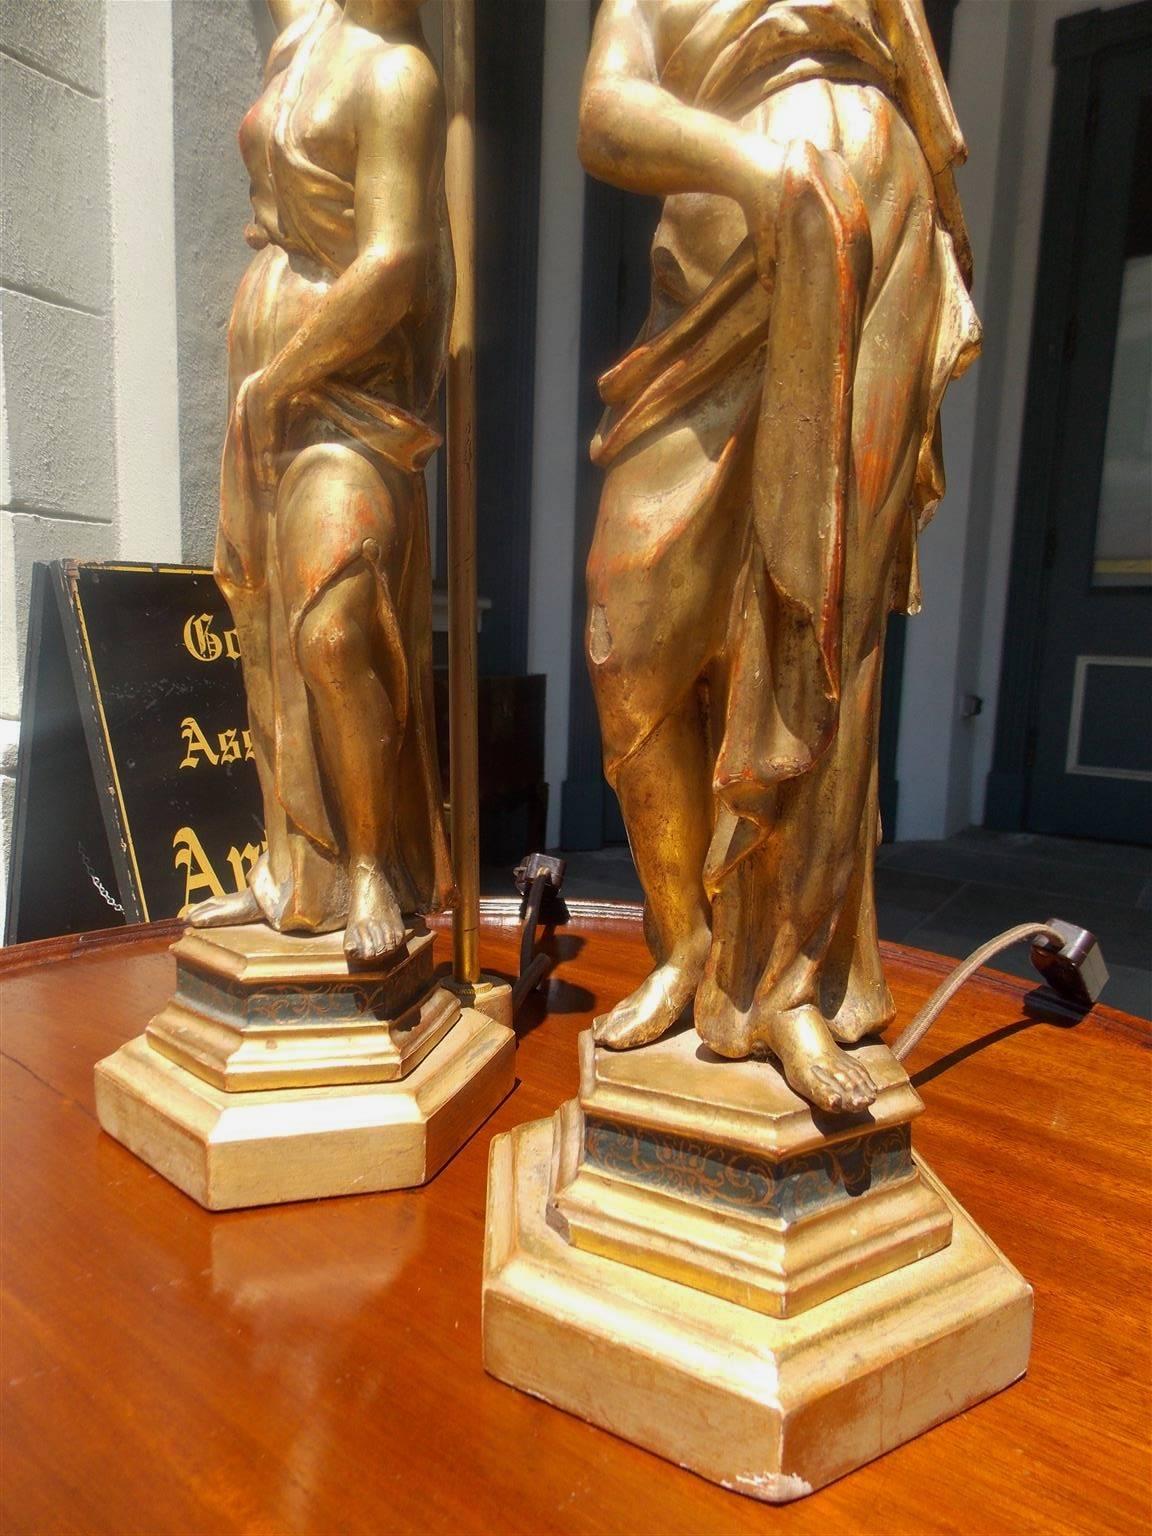 Pair of English Gilt Carved Wood Figural Statues Converted to Lamps, Circa 1780 For Sale 1